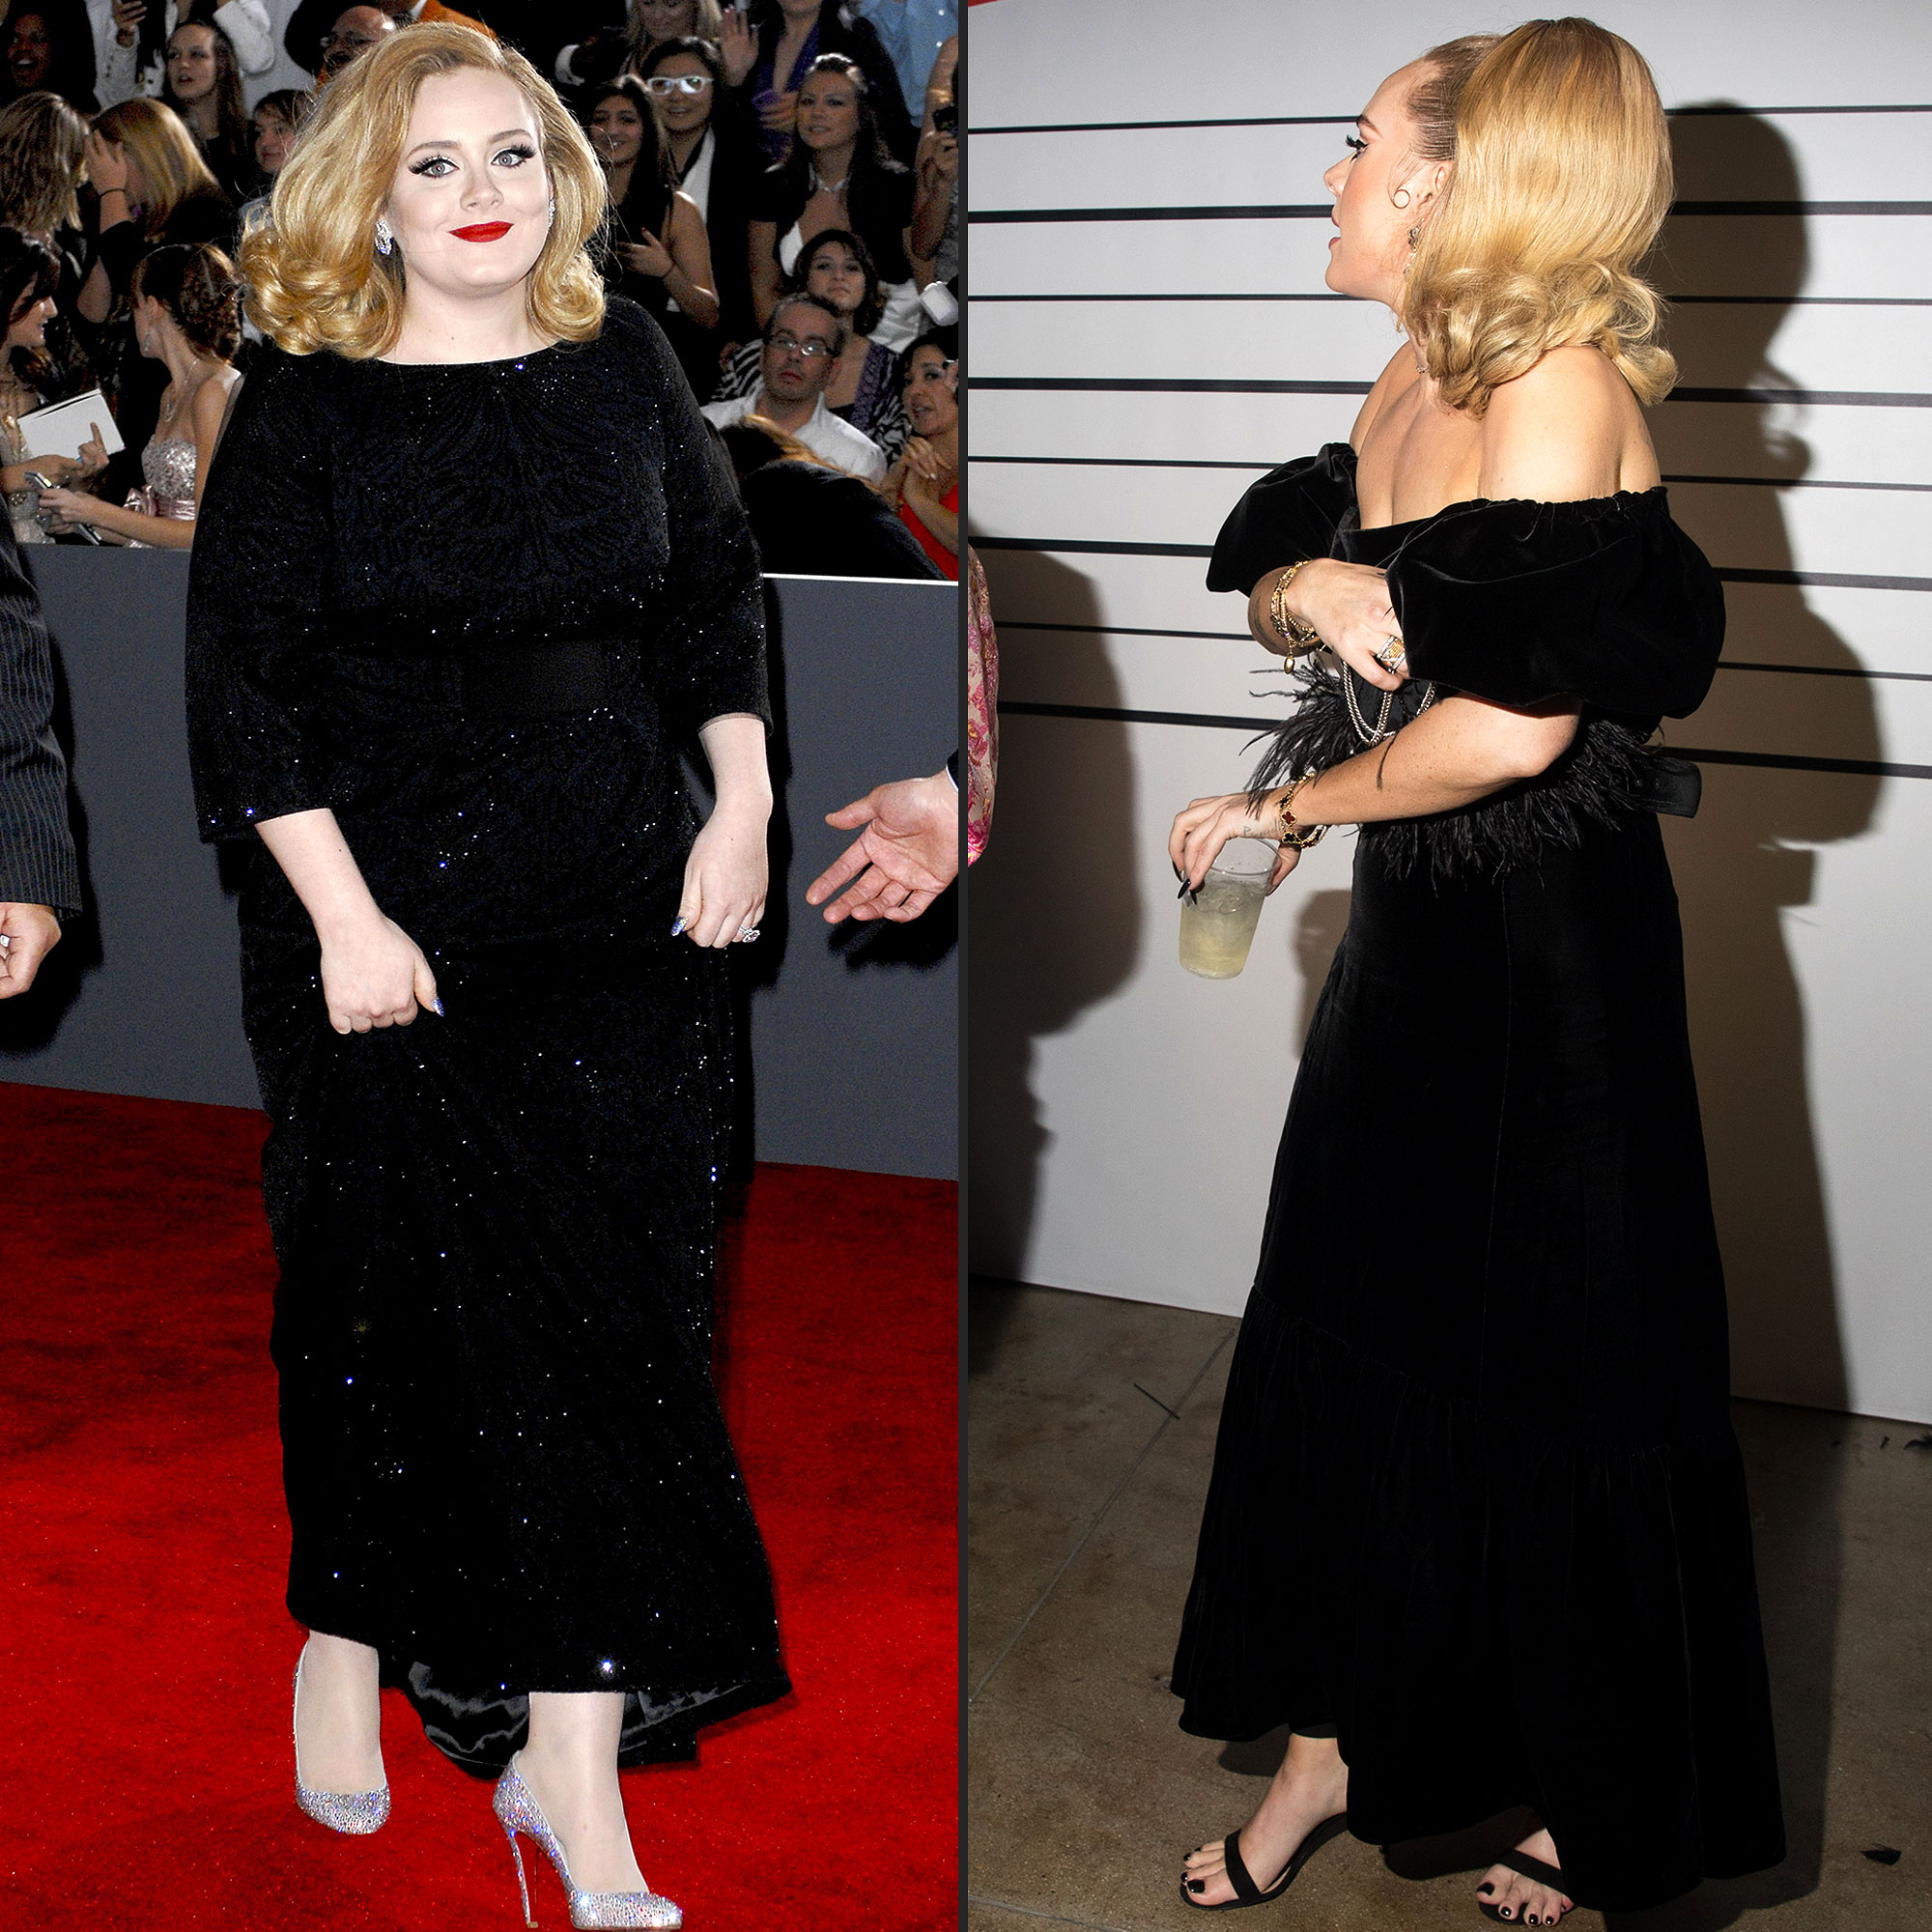 Adele's Weight Loss Transformation: Singer's Lost About 70 Lbs